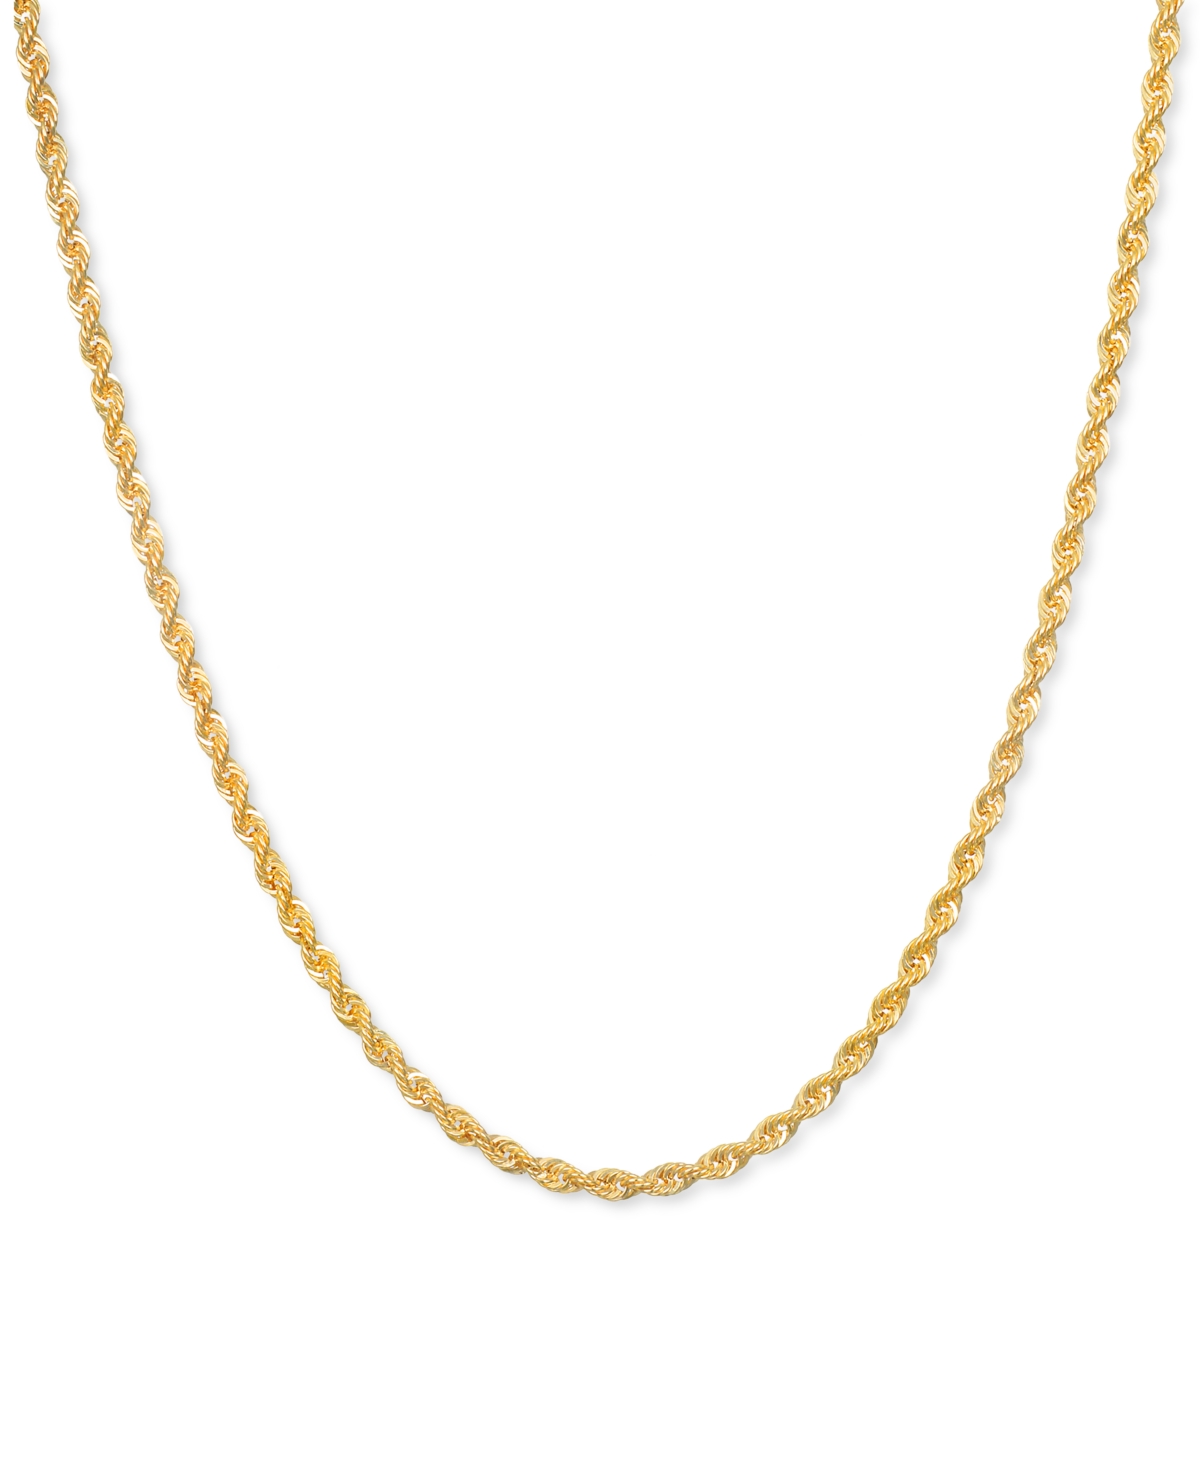 Sparkle Rope 18" Chain Necklace (2mm) in 14k Gold - Yellow Gold